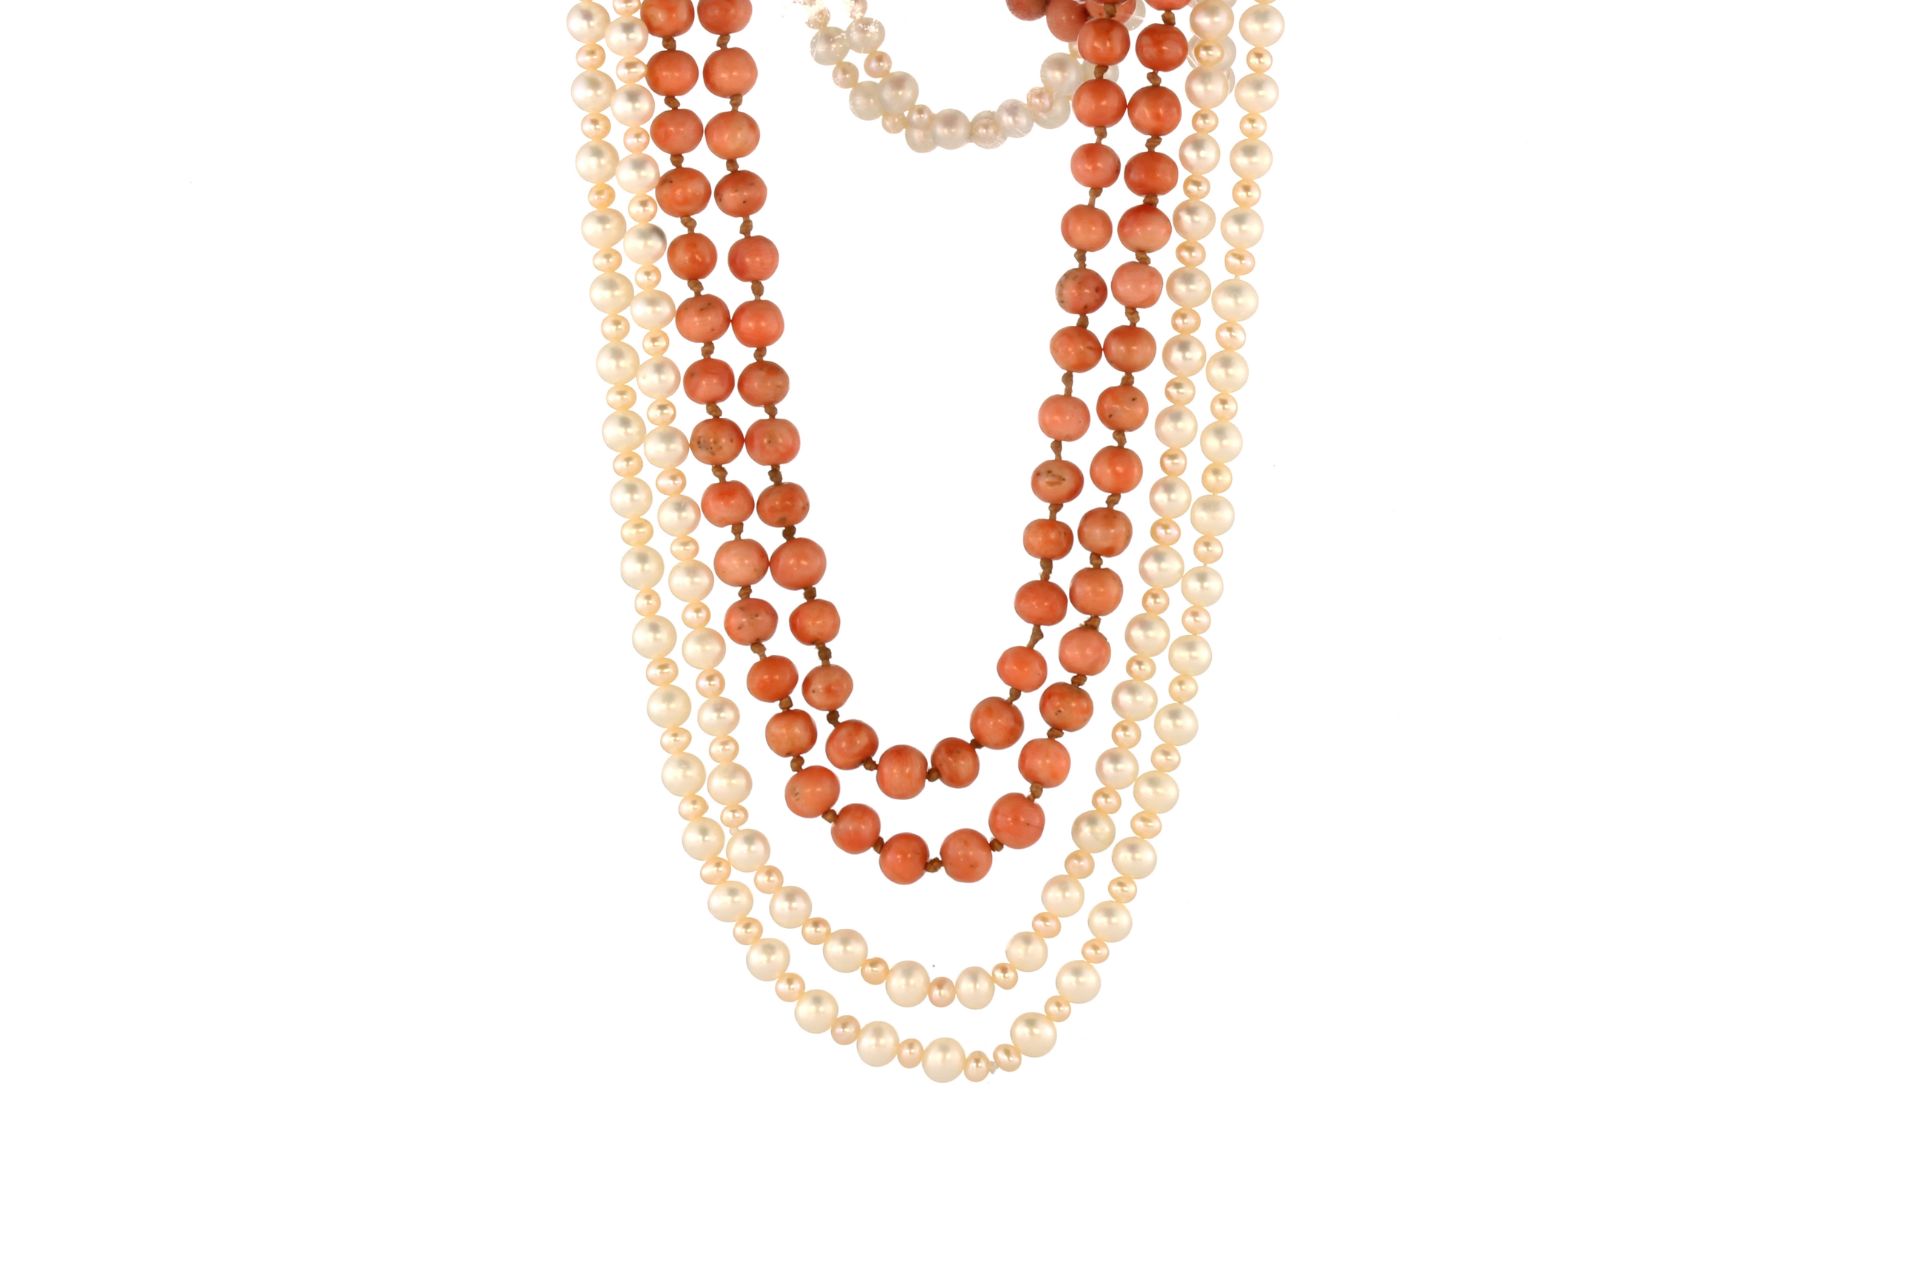 An antique coral bead necklace designed as a long single strand of 170 coral beads of